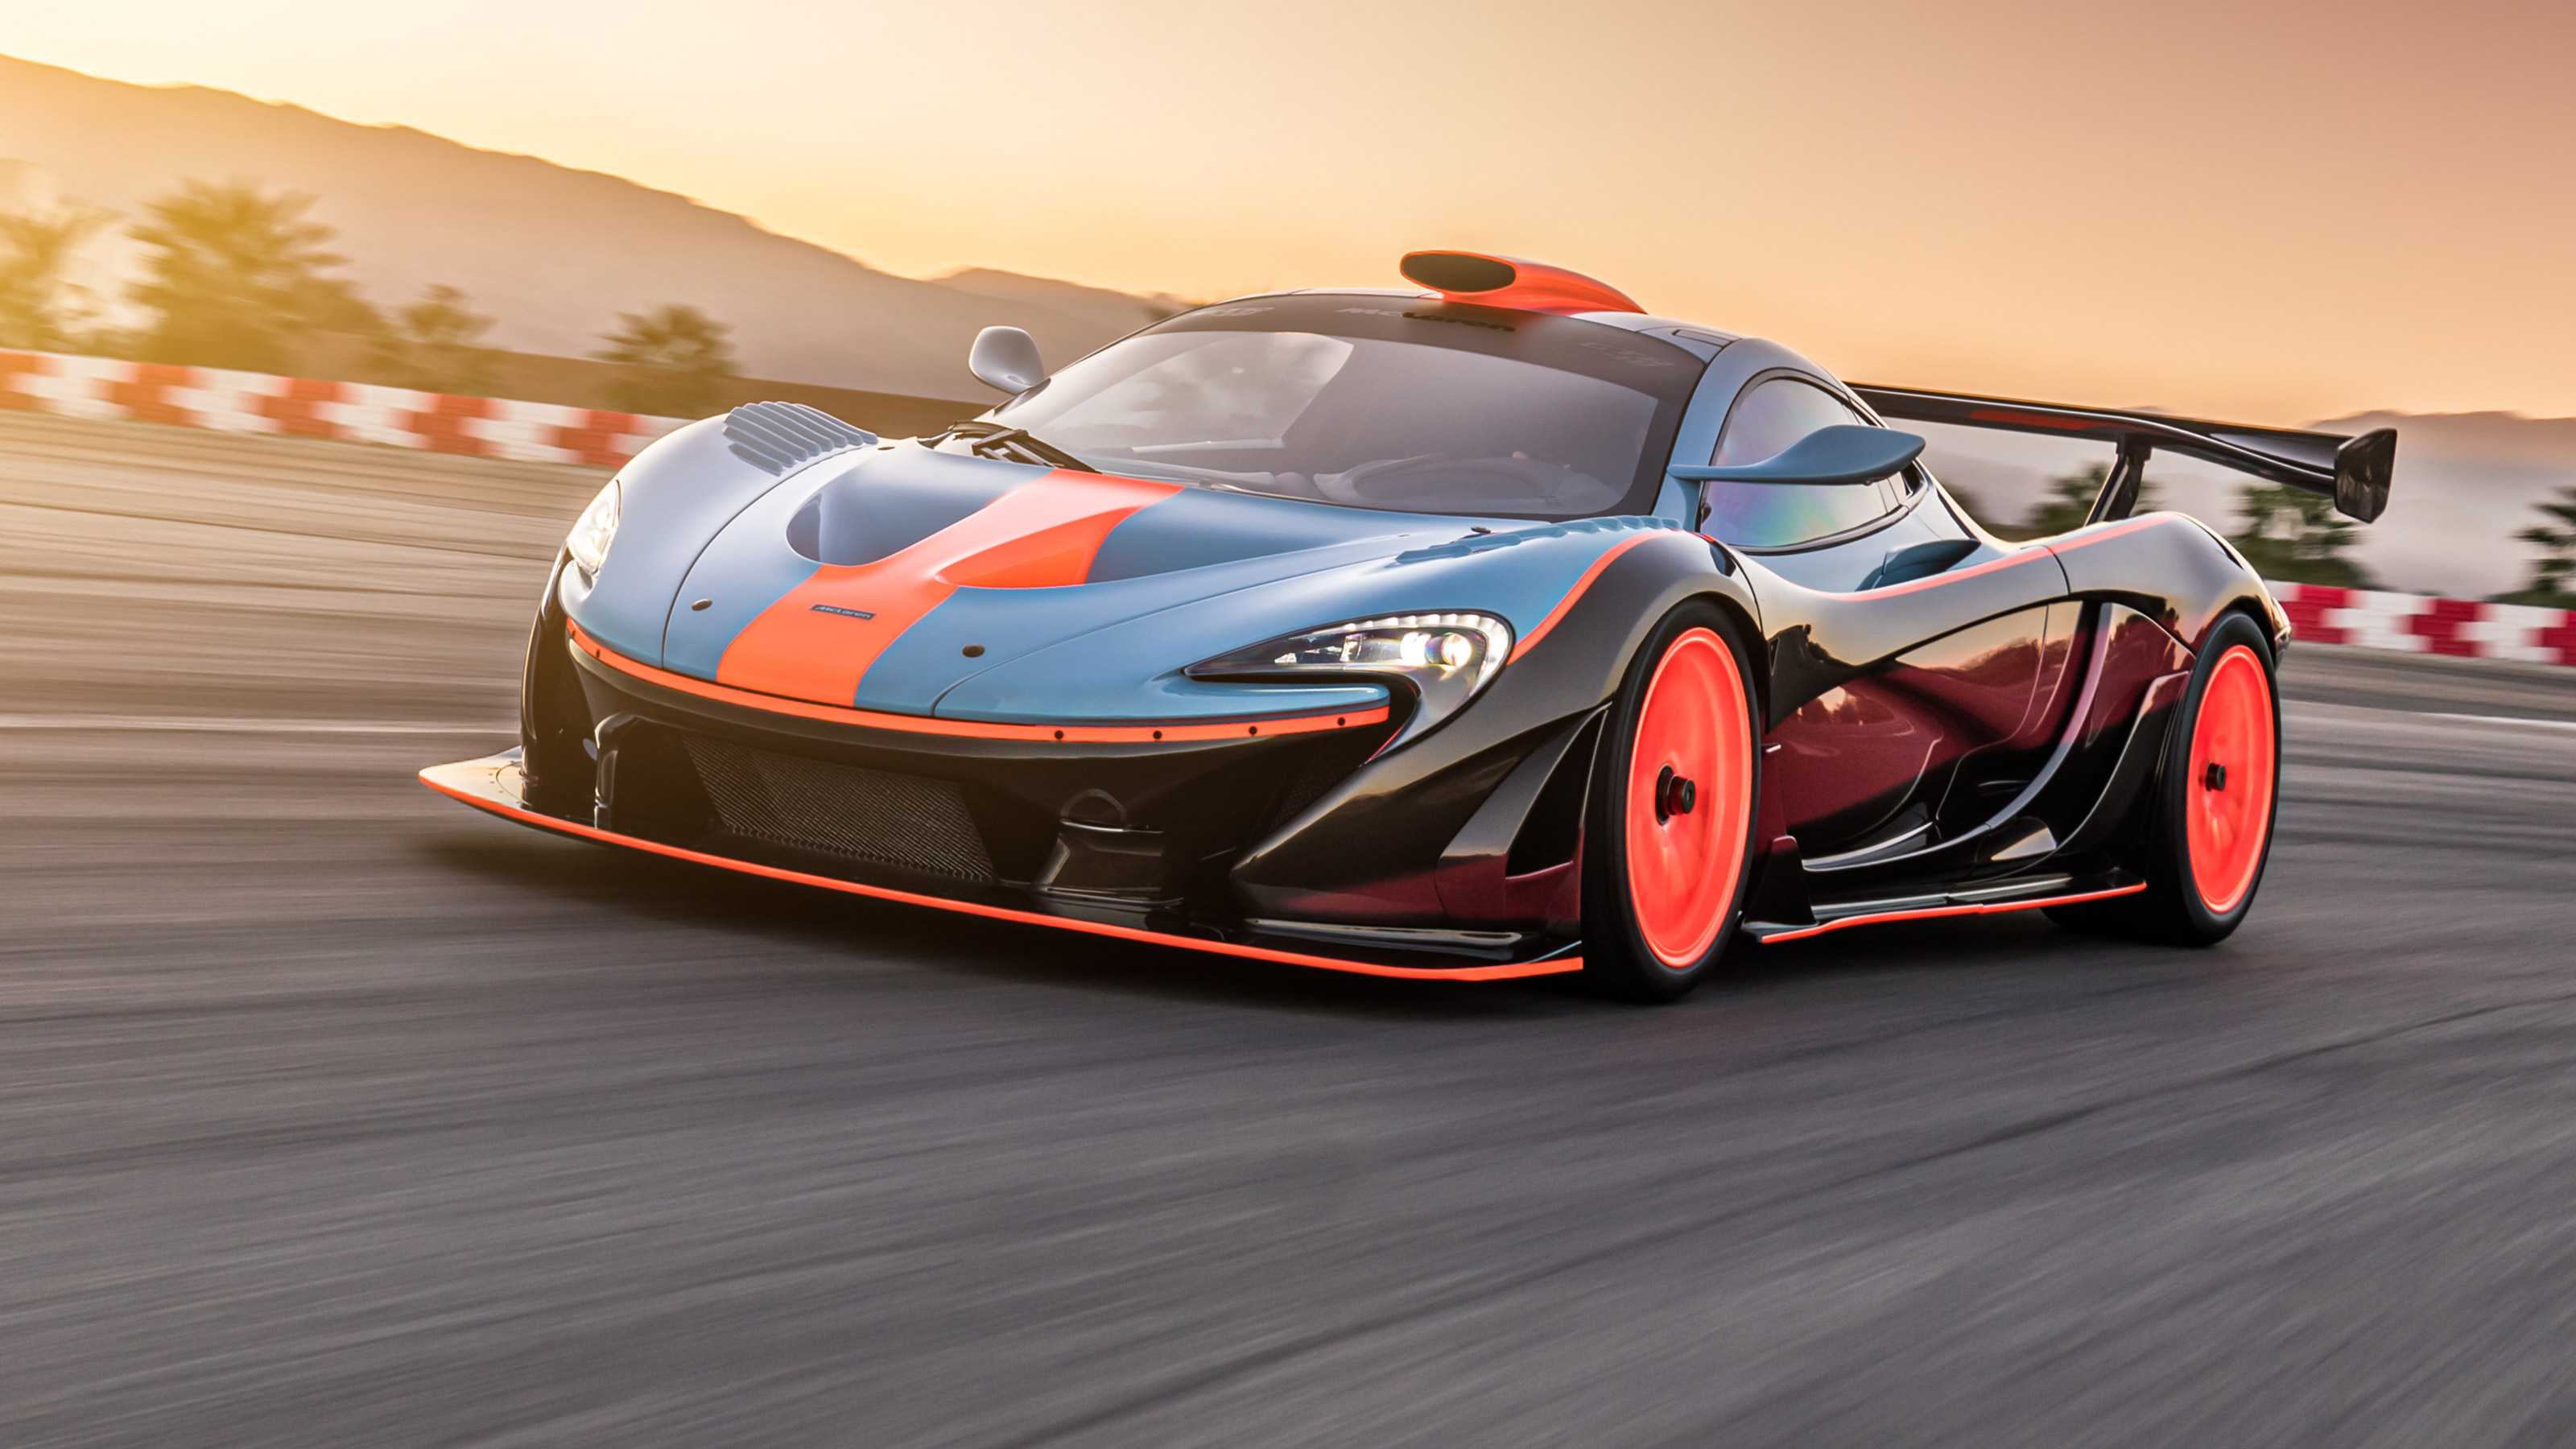 Mclaren P1 Gtr Review We Take To The Streets In Converted Road Legal Racer Evo